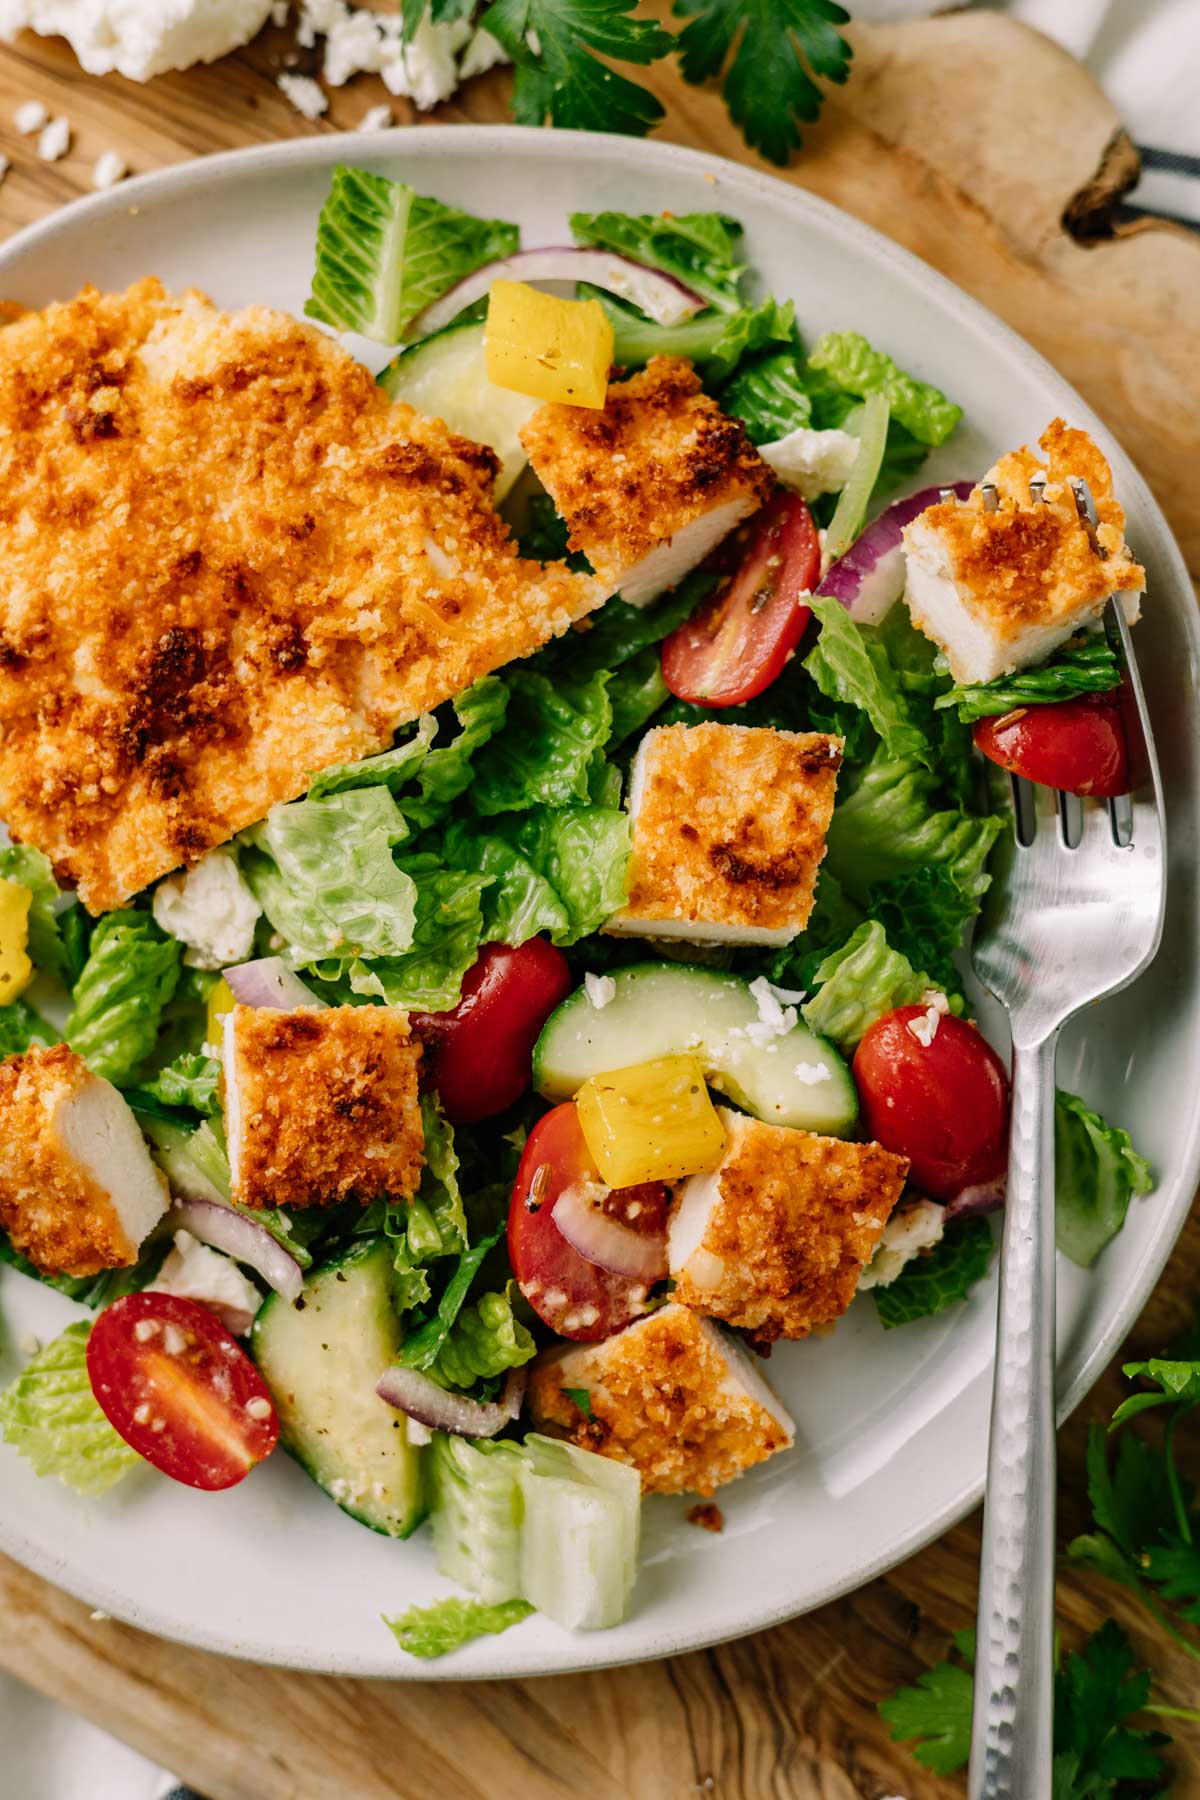 Crispy chicken cutlet sliced and served on top of a salad with tomatoes, cucumber, and bell pepper